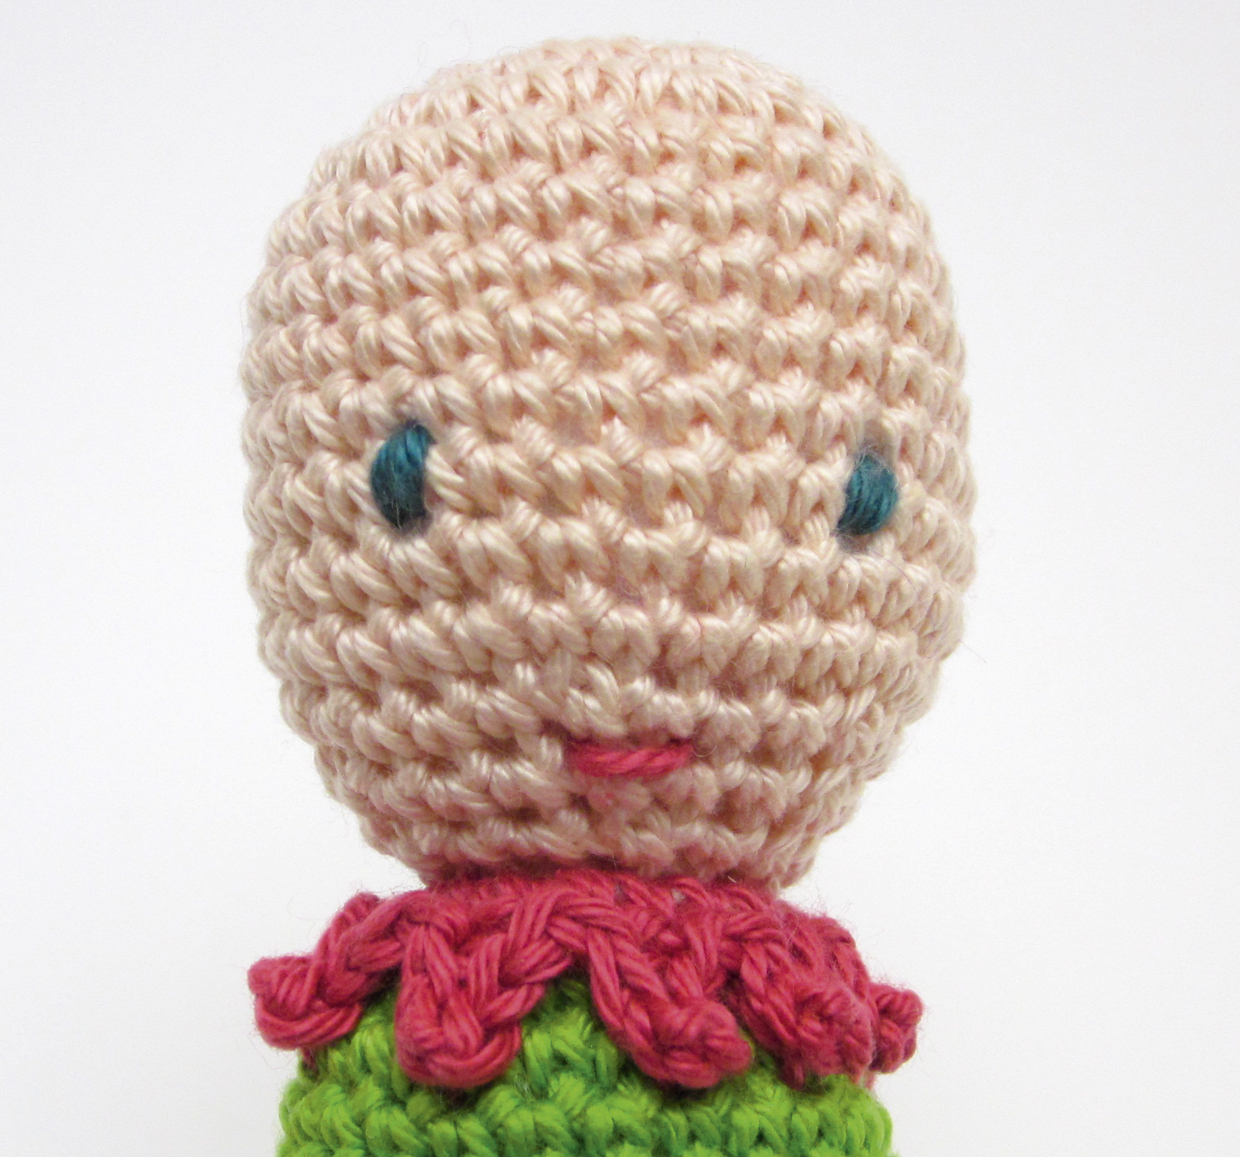 How_to_join_amigurumi_step_07